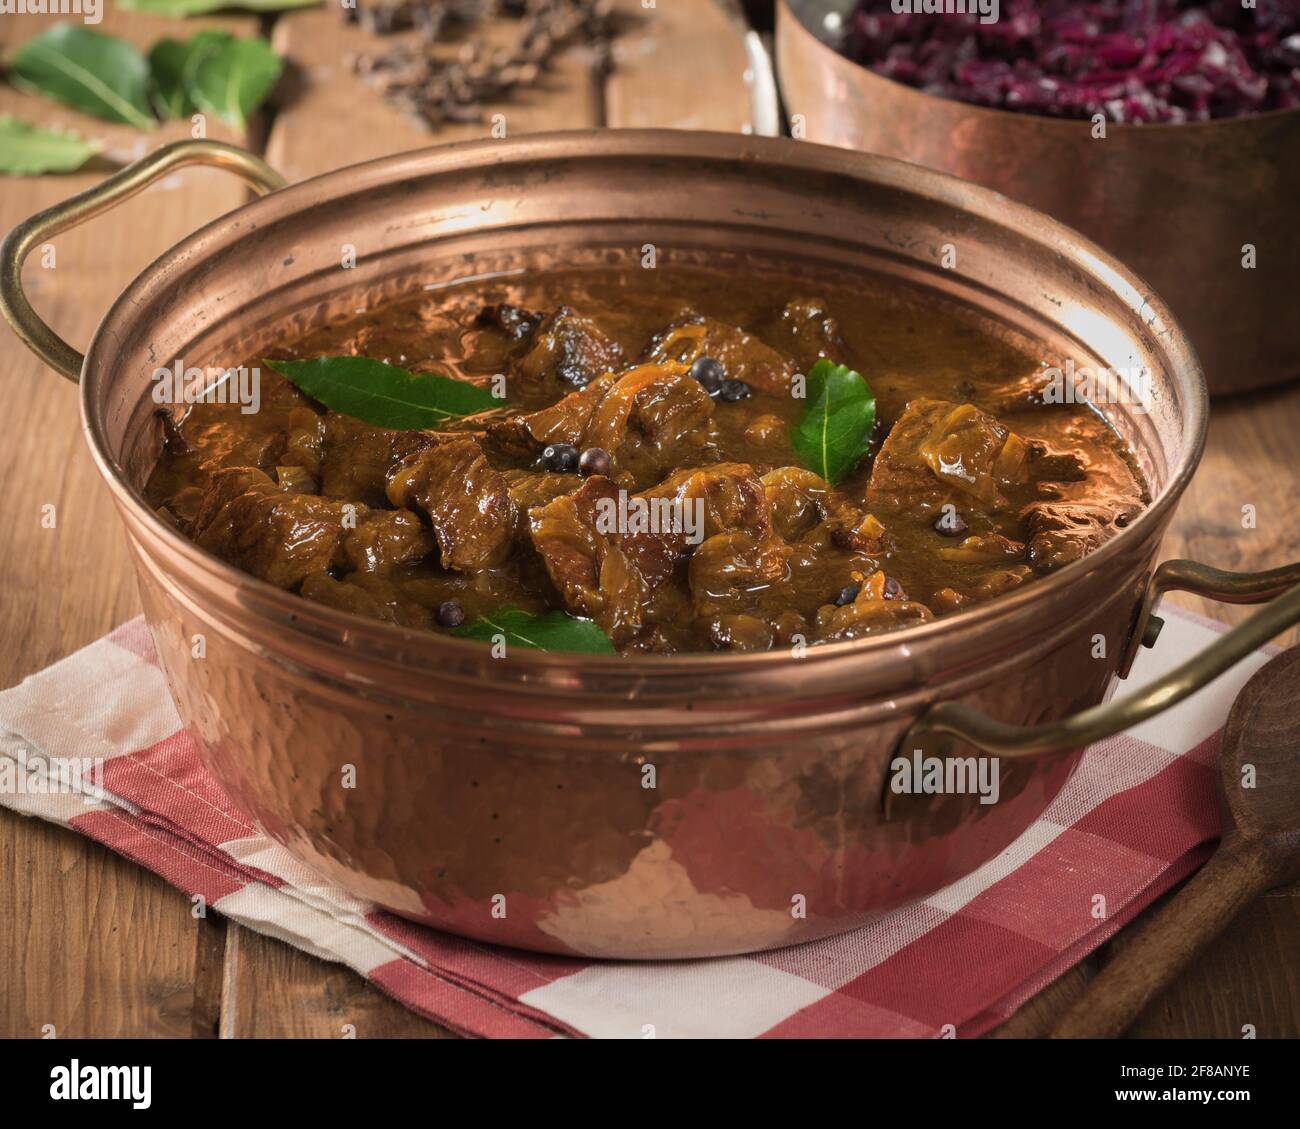 Hachee. Dutch beef and onion stew with red cabbage. Netherlands Food Stock Photo